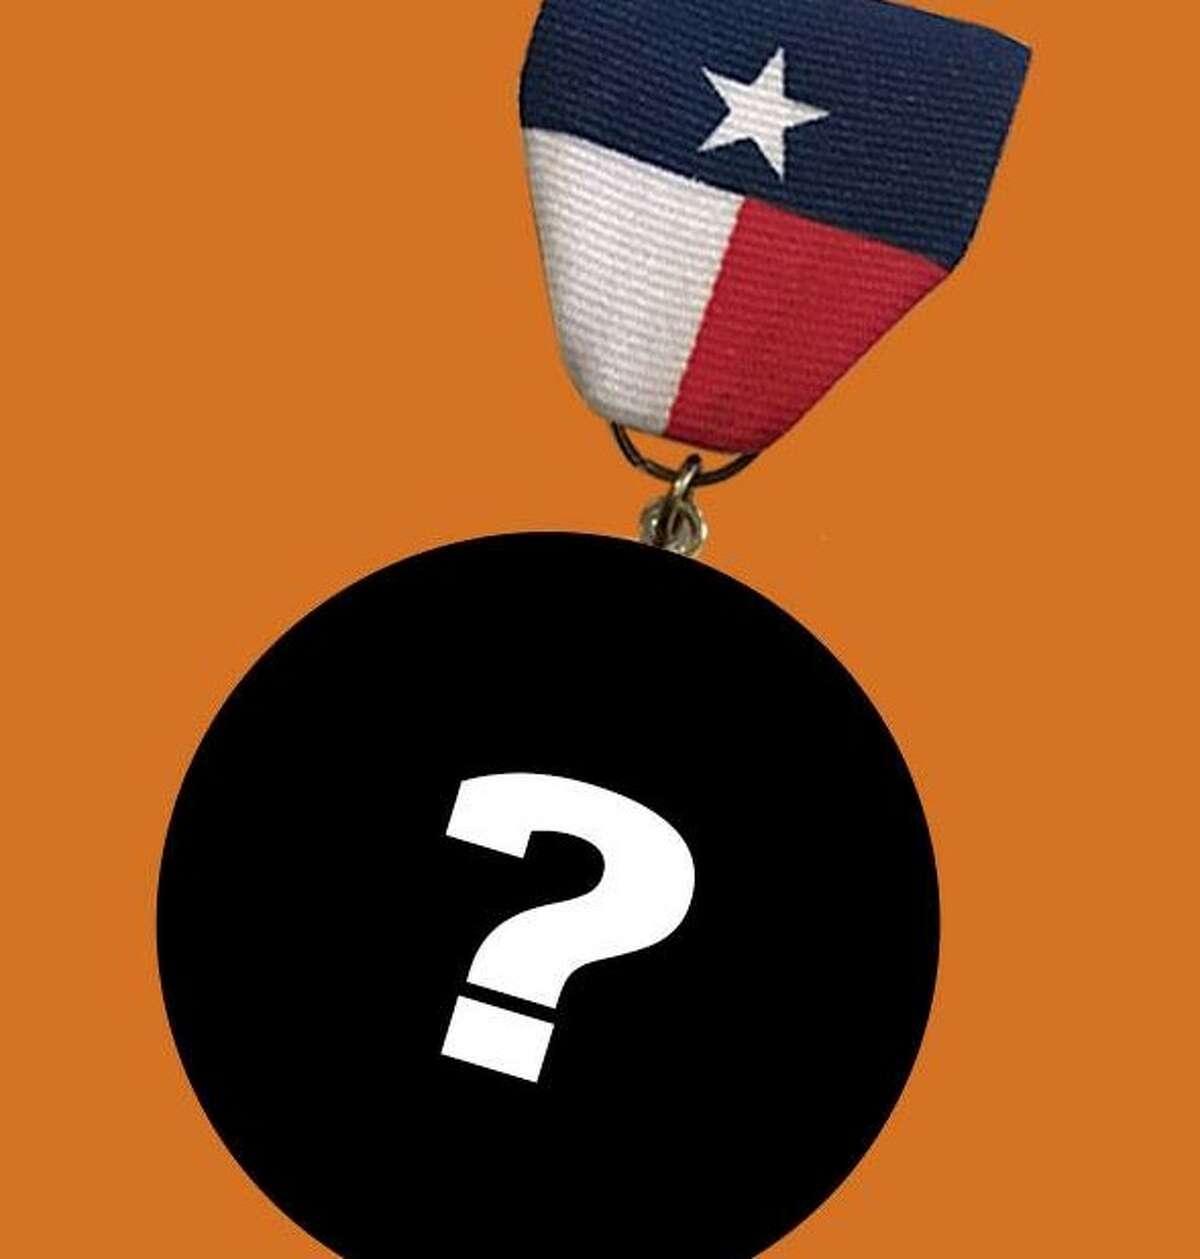 The San Antonio Stock Show & Rodeo is asking the public to help design its 2020 Fiesta medal.